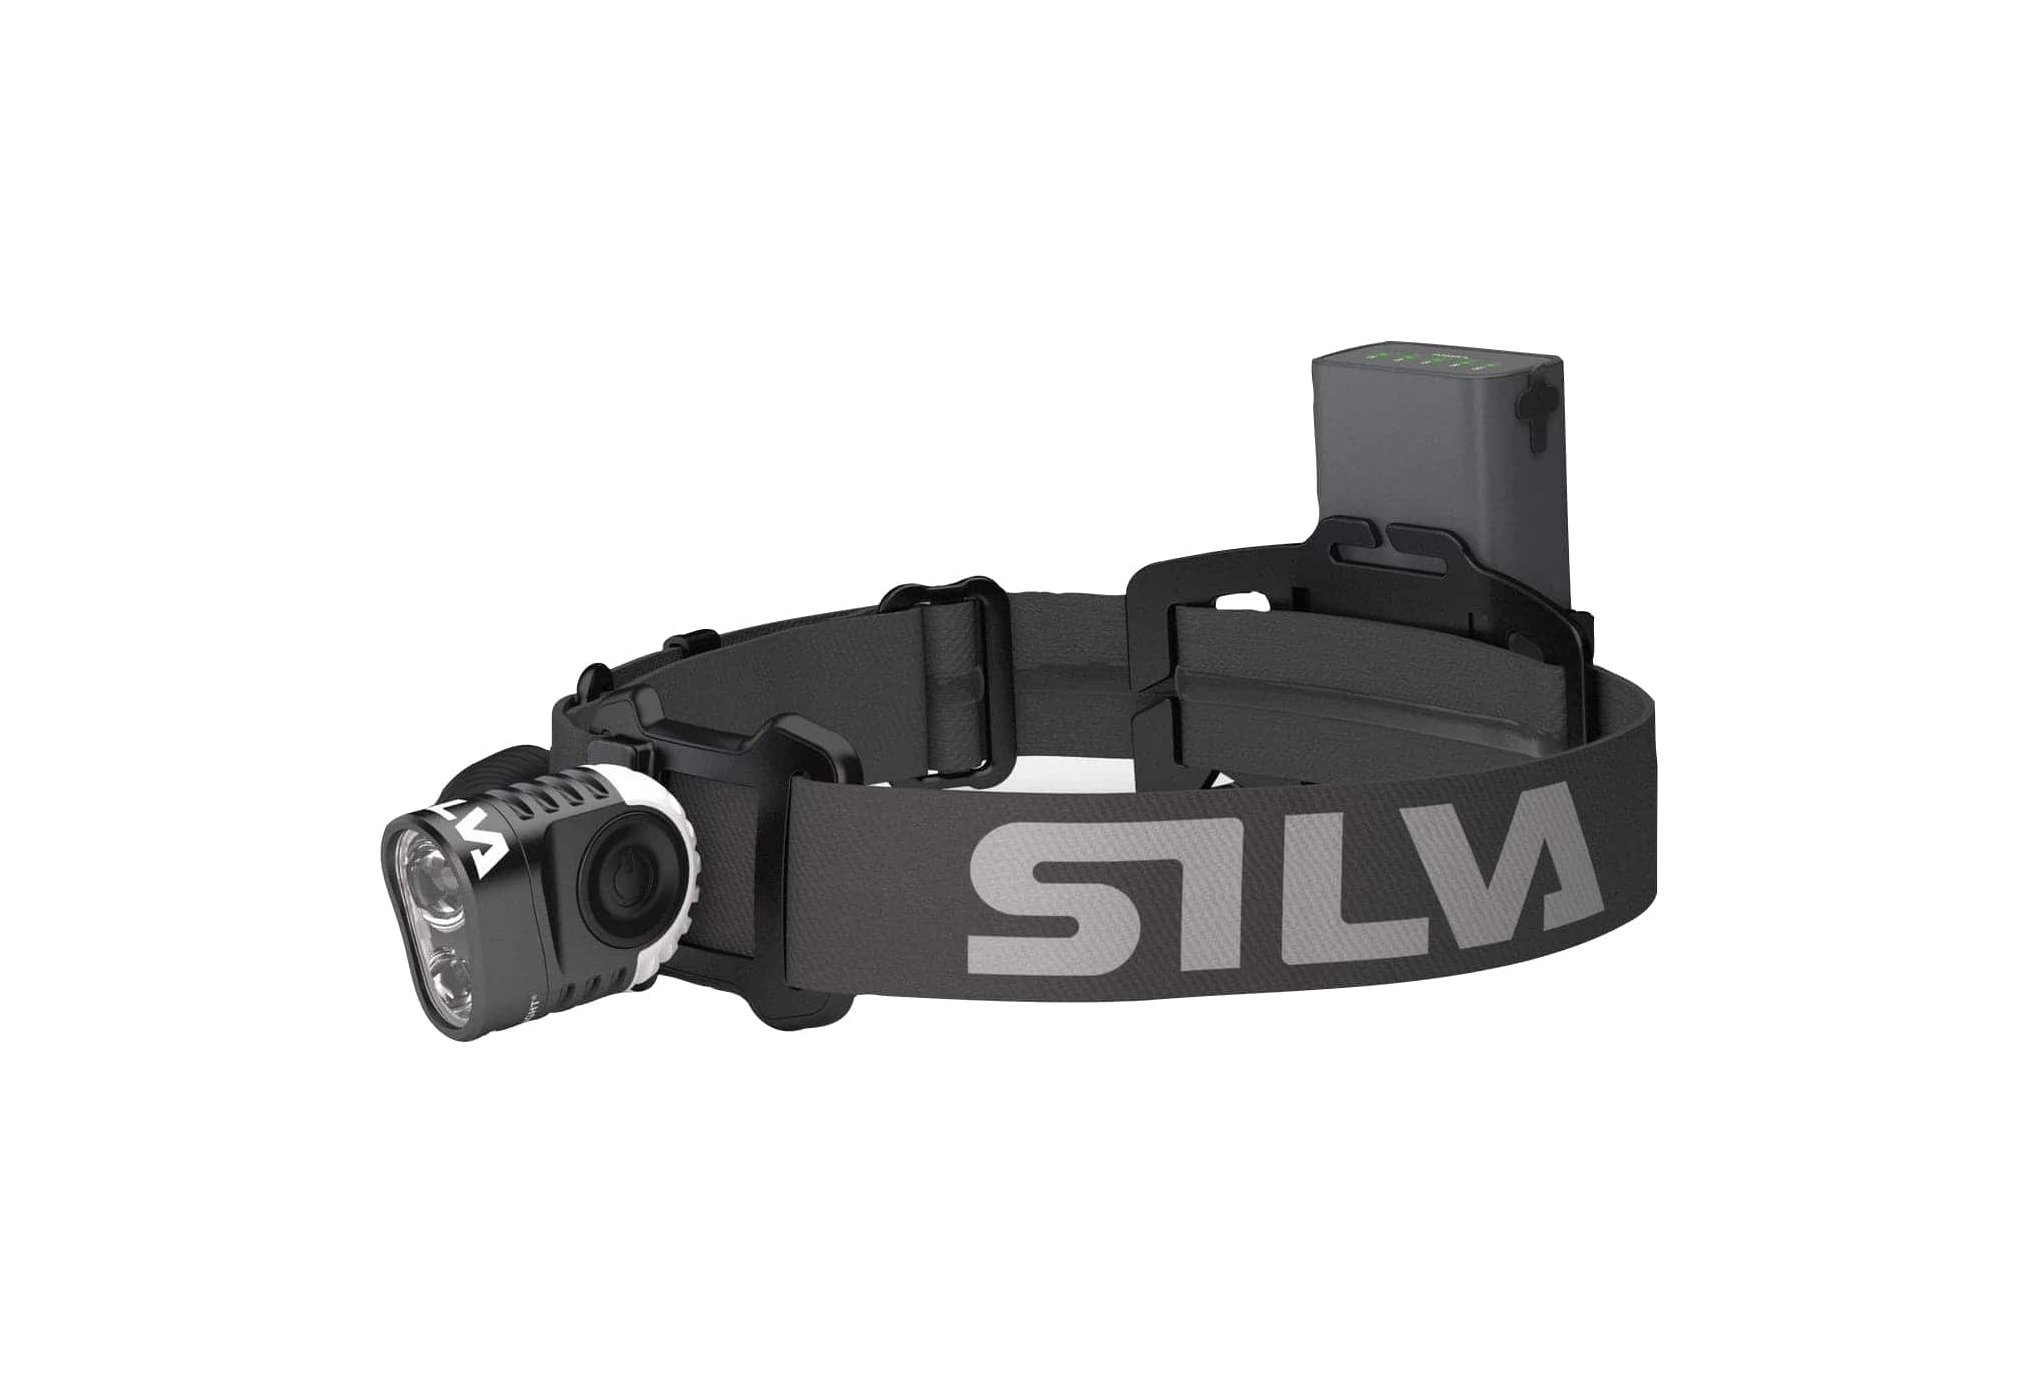 Silva Trail Speed 5X Lampe frontale / éclairage